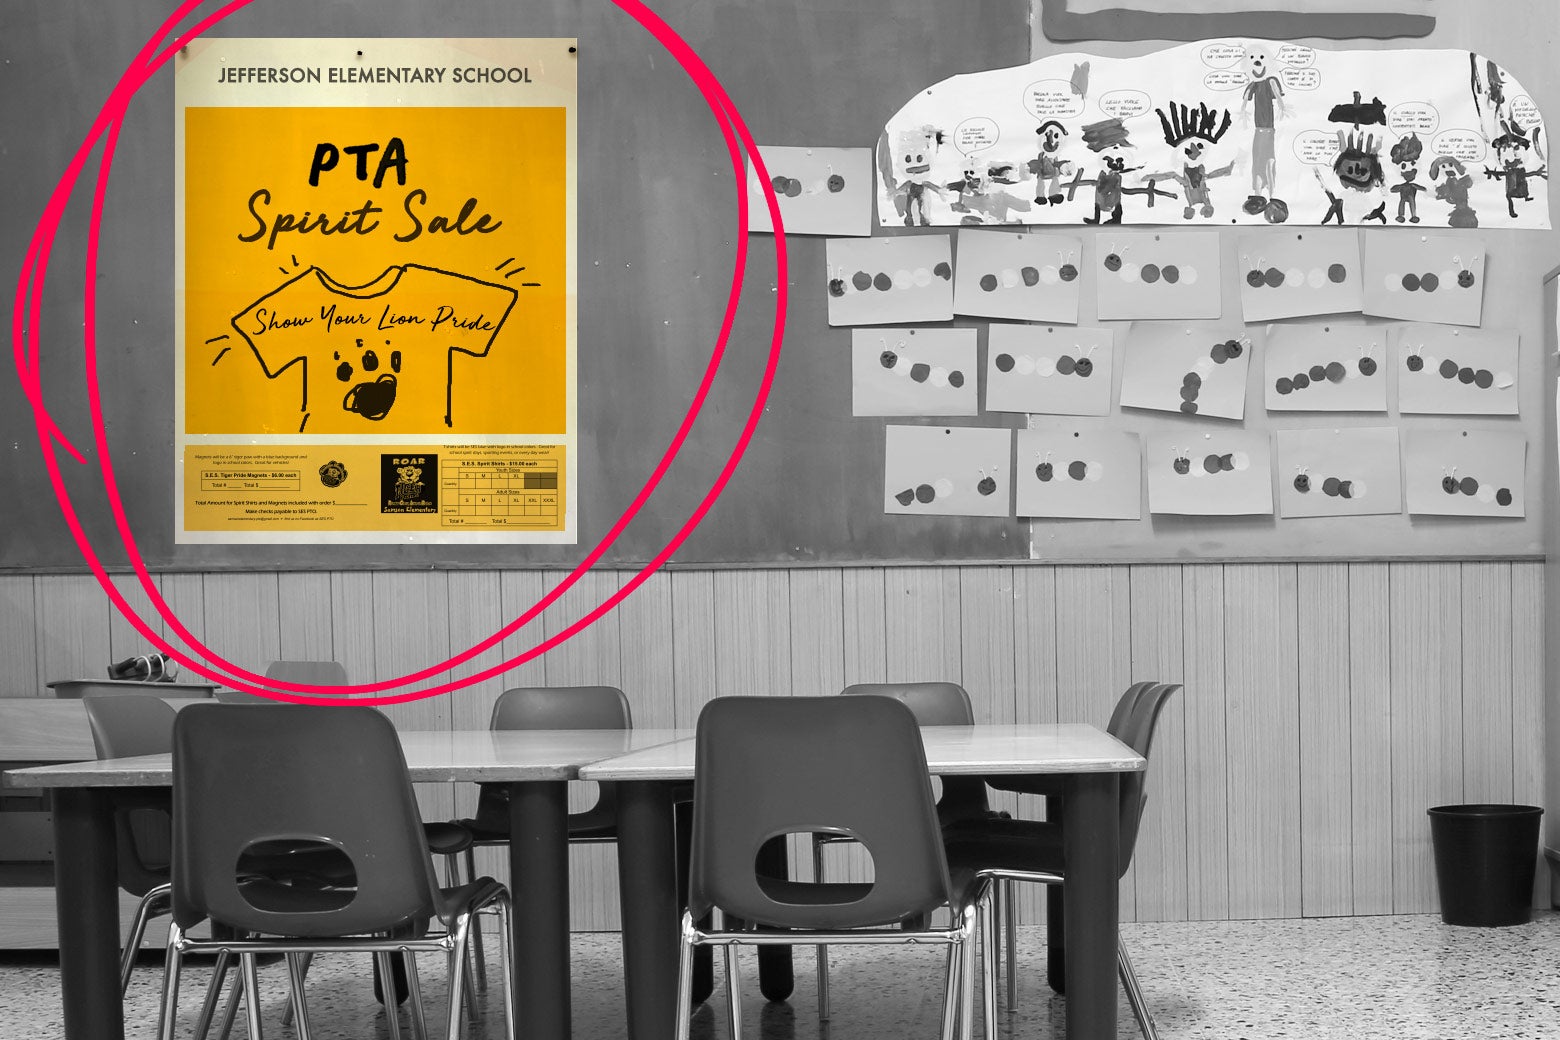 A sign in a classroom that says "PTA spirit sale."